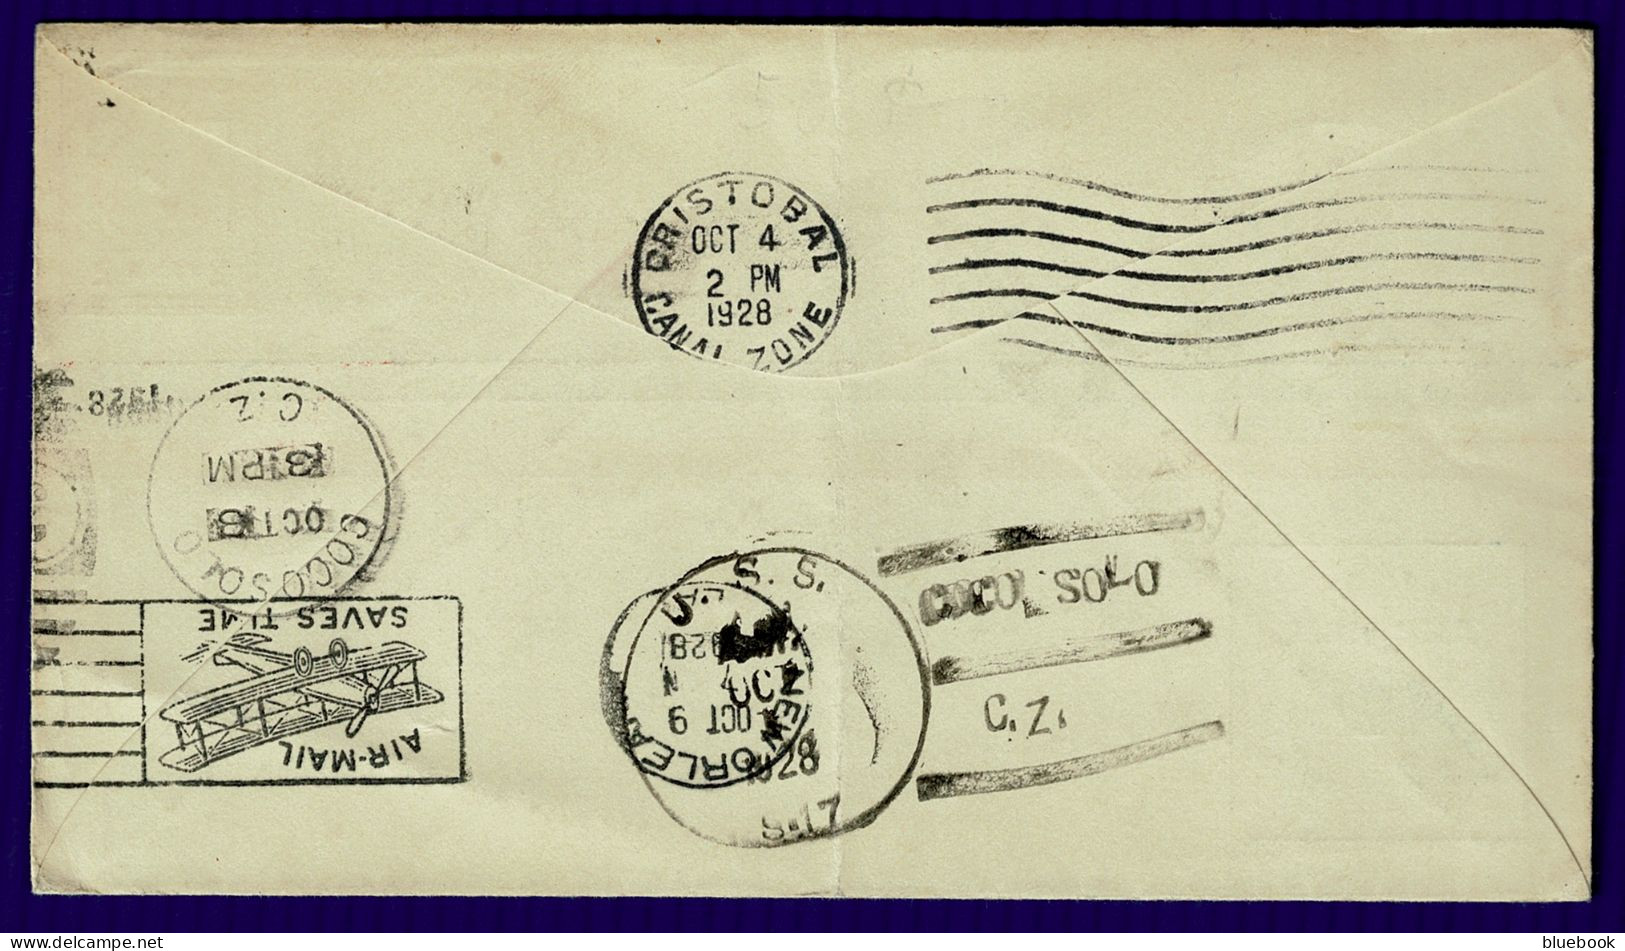 Ref 1639 - 1928 USA Canal Zone Postal Stationery Cover Uprated - Submarine U.S.S. Coco Solo - Zona Del Canale / Canal Zone